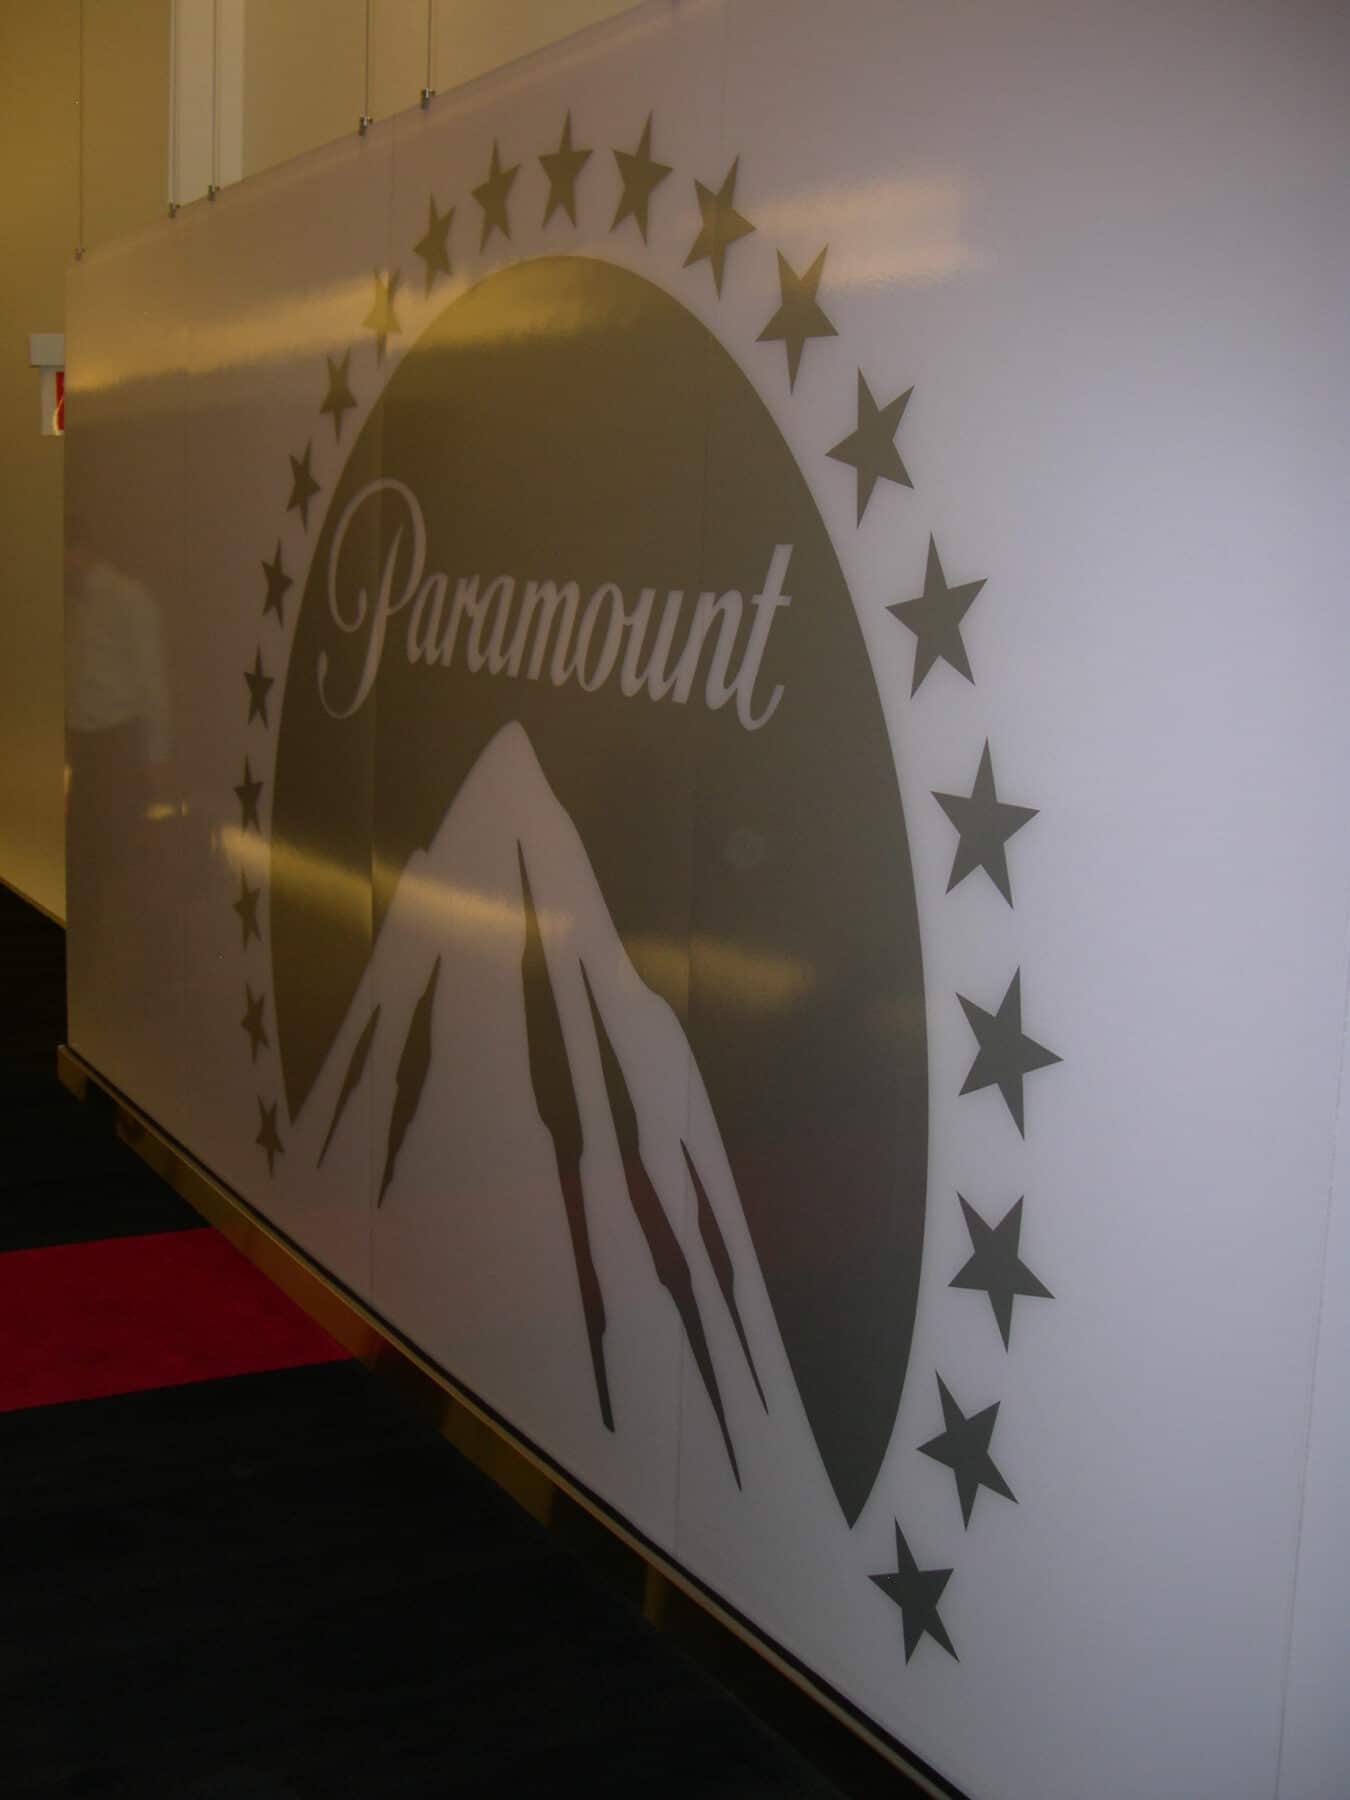 Custom Fabrication of Etched Paramount Logo Architectural Glass Accent Wall from Construction Specialty Projects by Commercial Builder & General Contractor Structural Enterprises